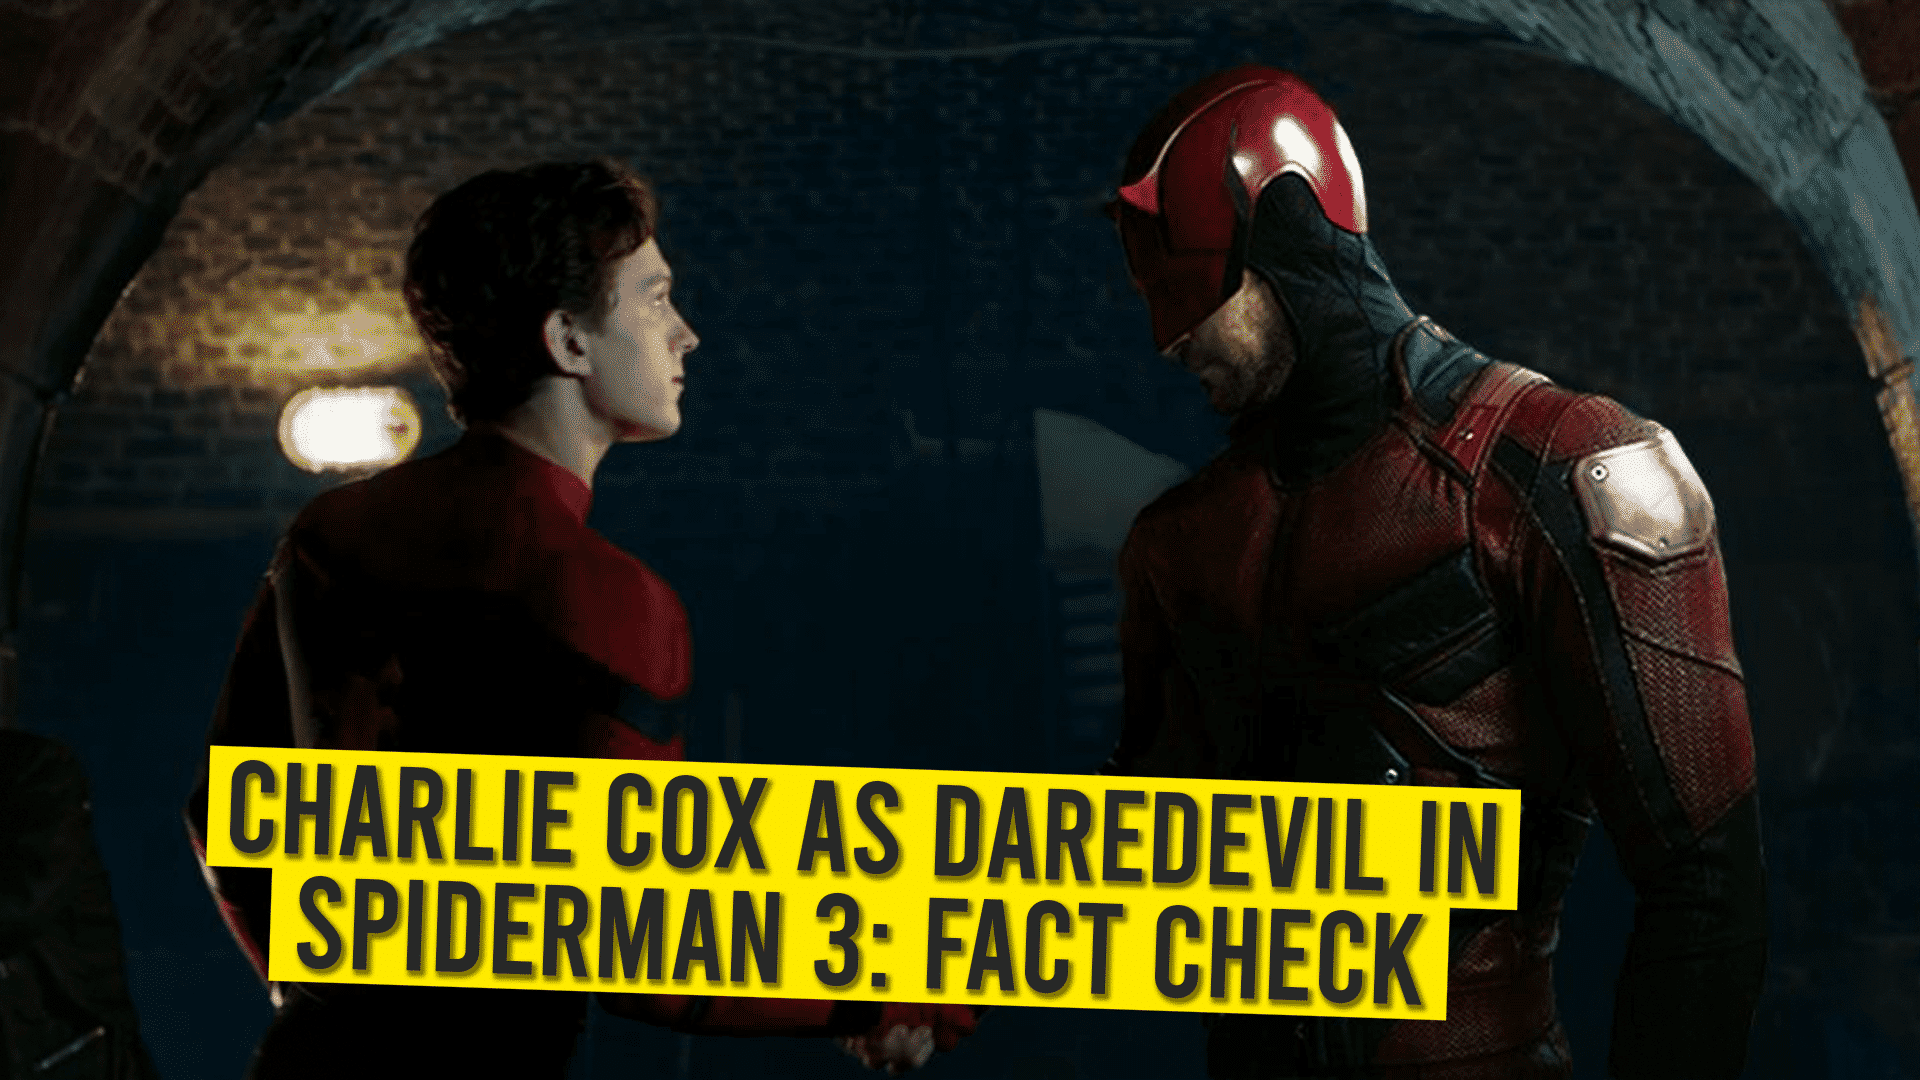 Charlie Cox As Daredevil In Spiderman 3: Fact Check